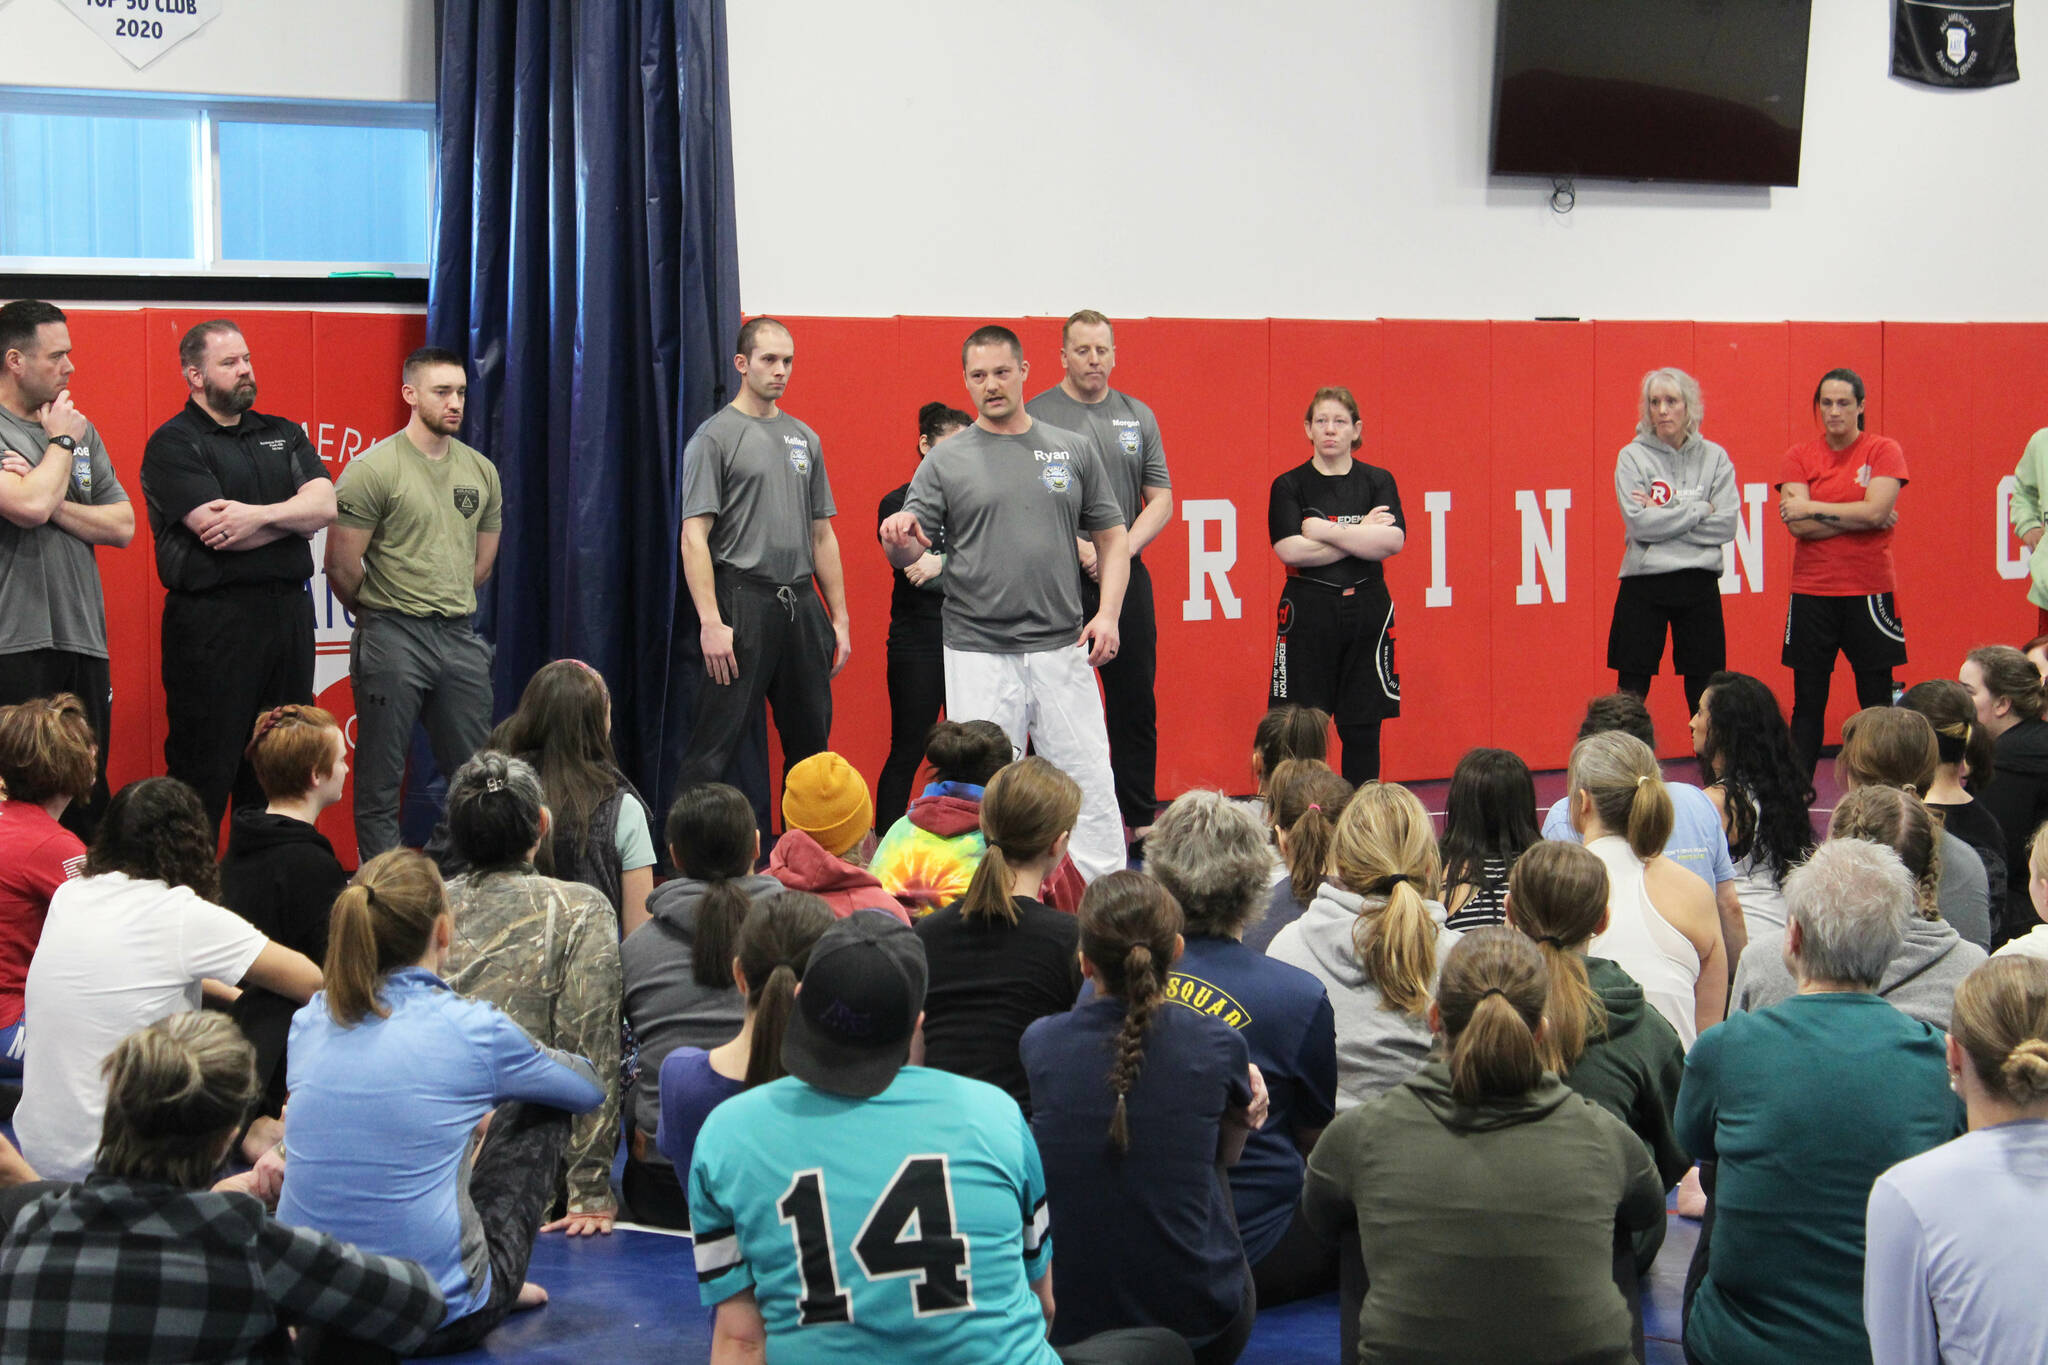 Homer Police Department Lt. Ryan Browning (center) provides opening remarks at a “Toss A Cop” event at the All American Training Center on Saturday, Jan. 21, 2023, in Soldotna, Alaska. (Ashlyn O’Hara/Peninsula Clarion)